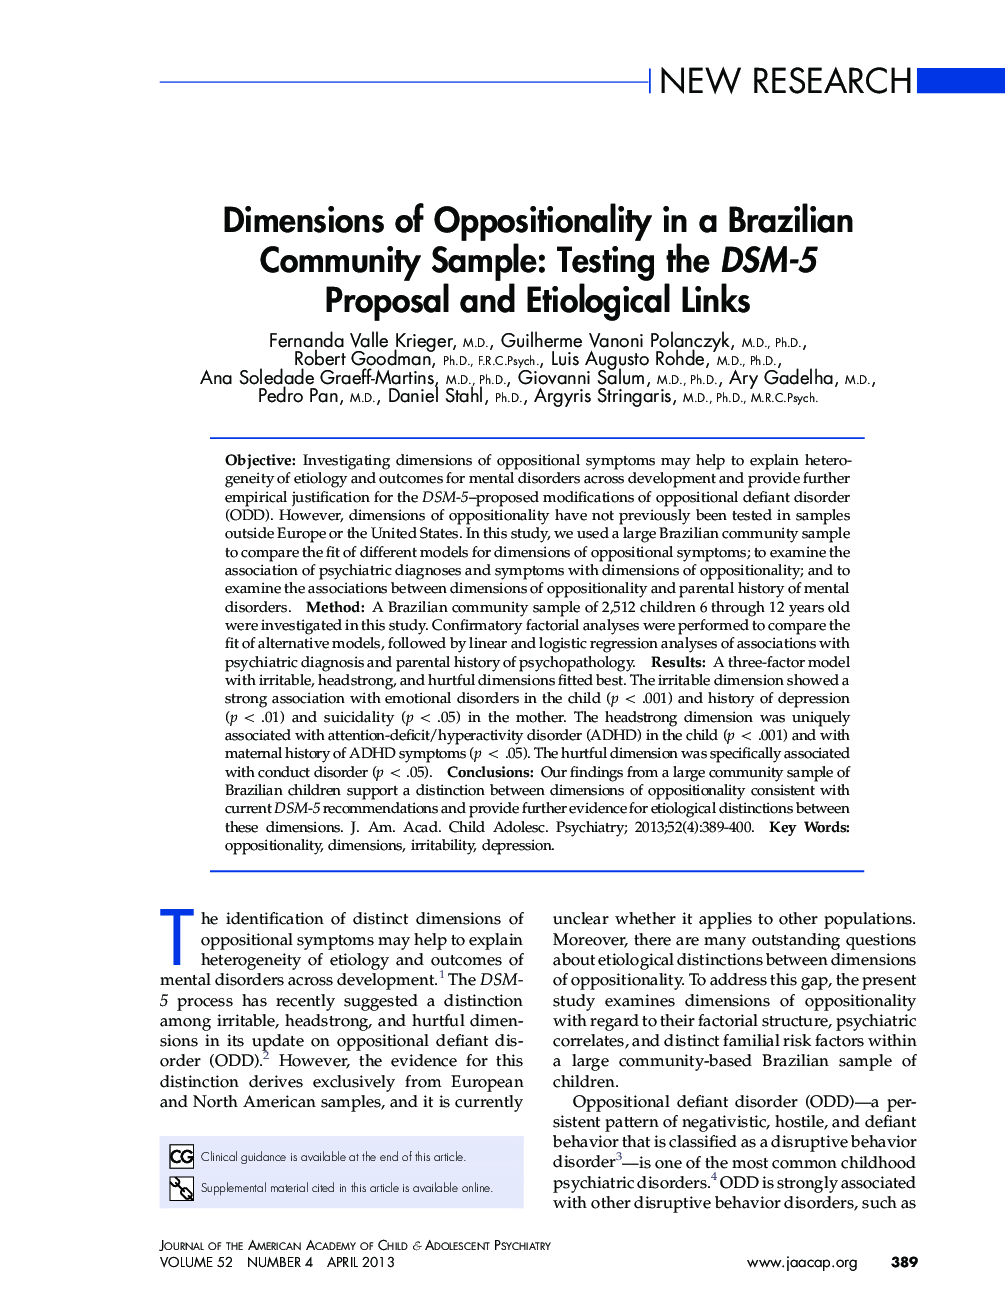 Dimensions of Oppositionality in a Brazilian Community Sample: Testing the DSM-5 Proposal and Etiological Links